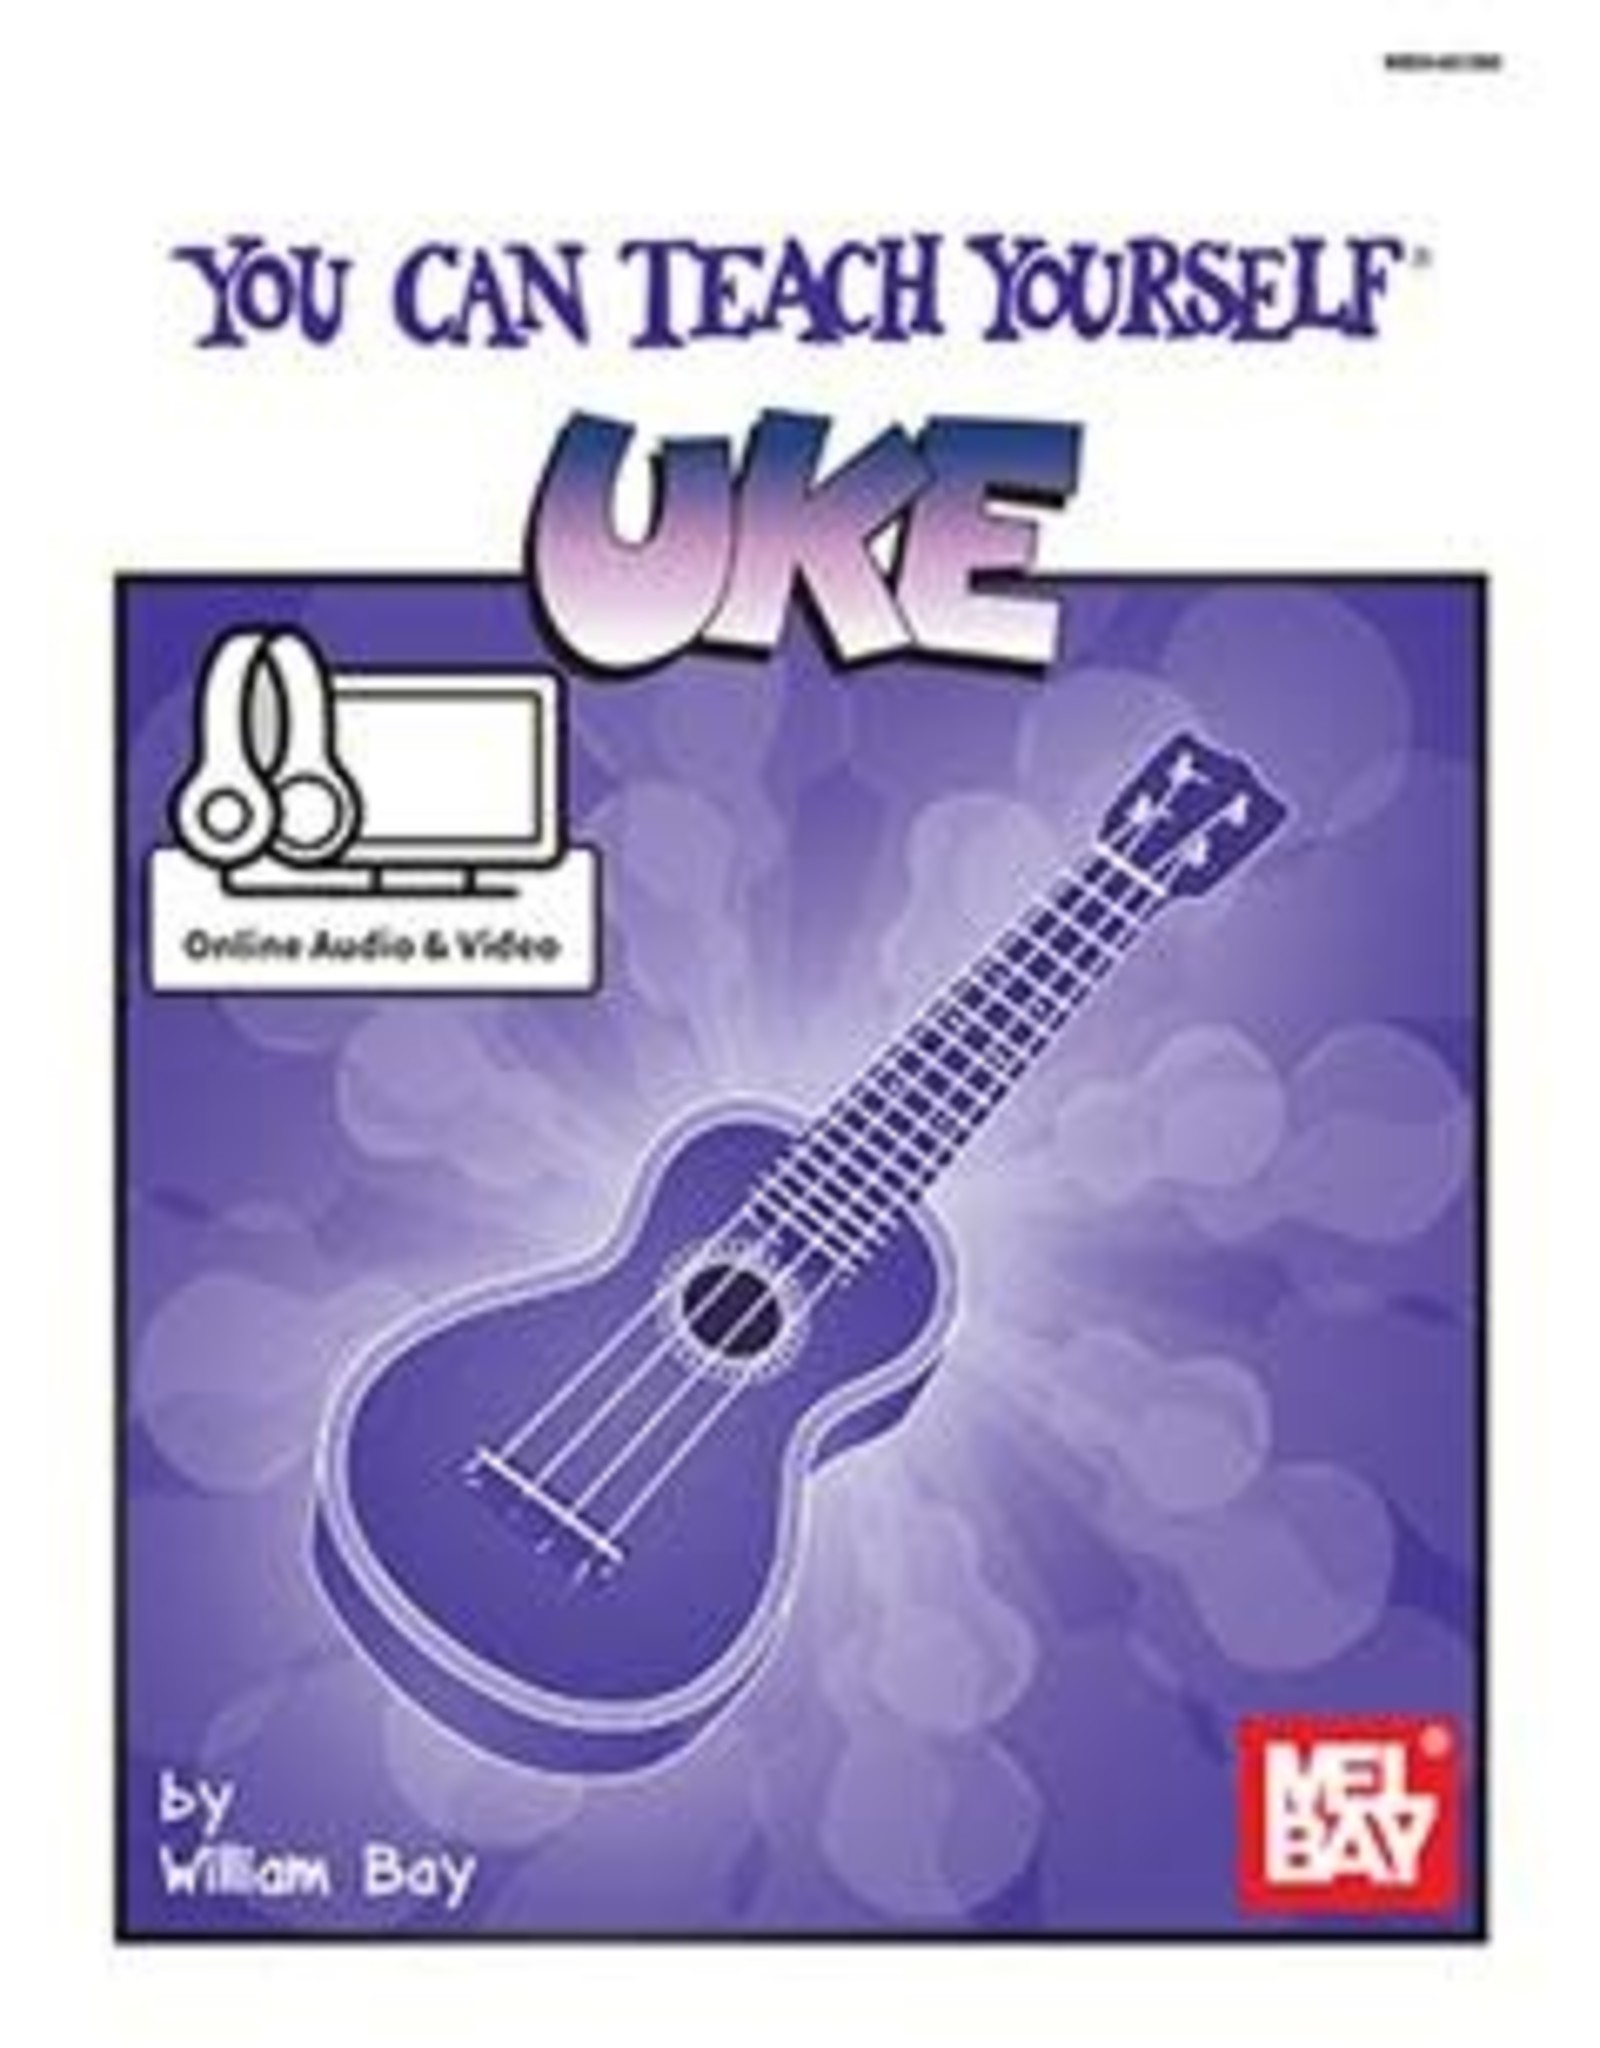 Mel Bay Publications, Inc. You Can Teach Yourself Uke by William Bay - Book + Online Access